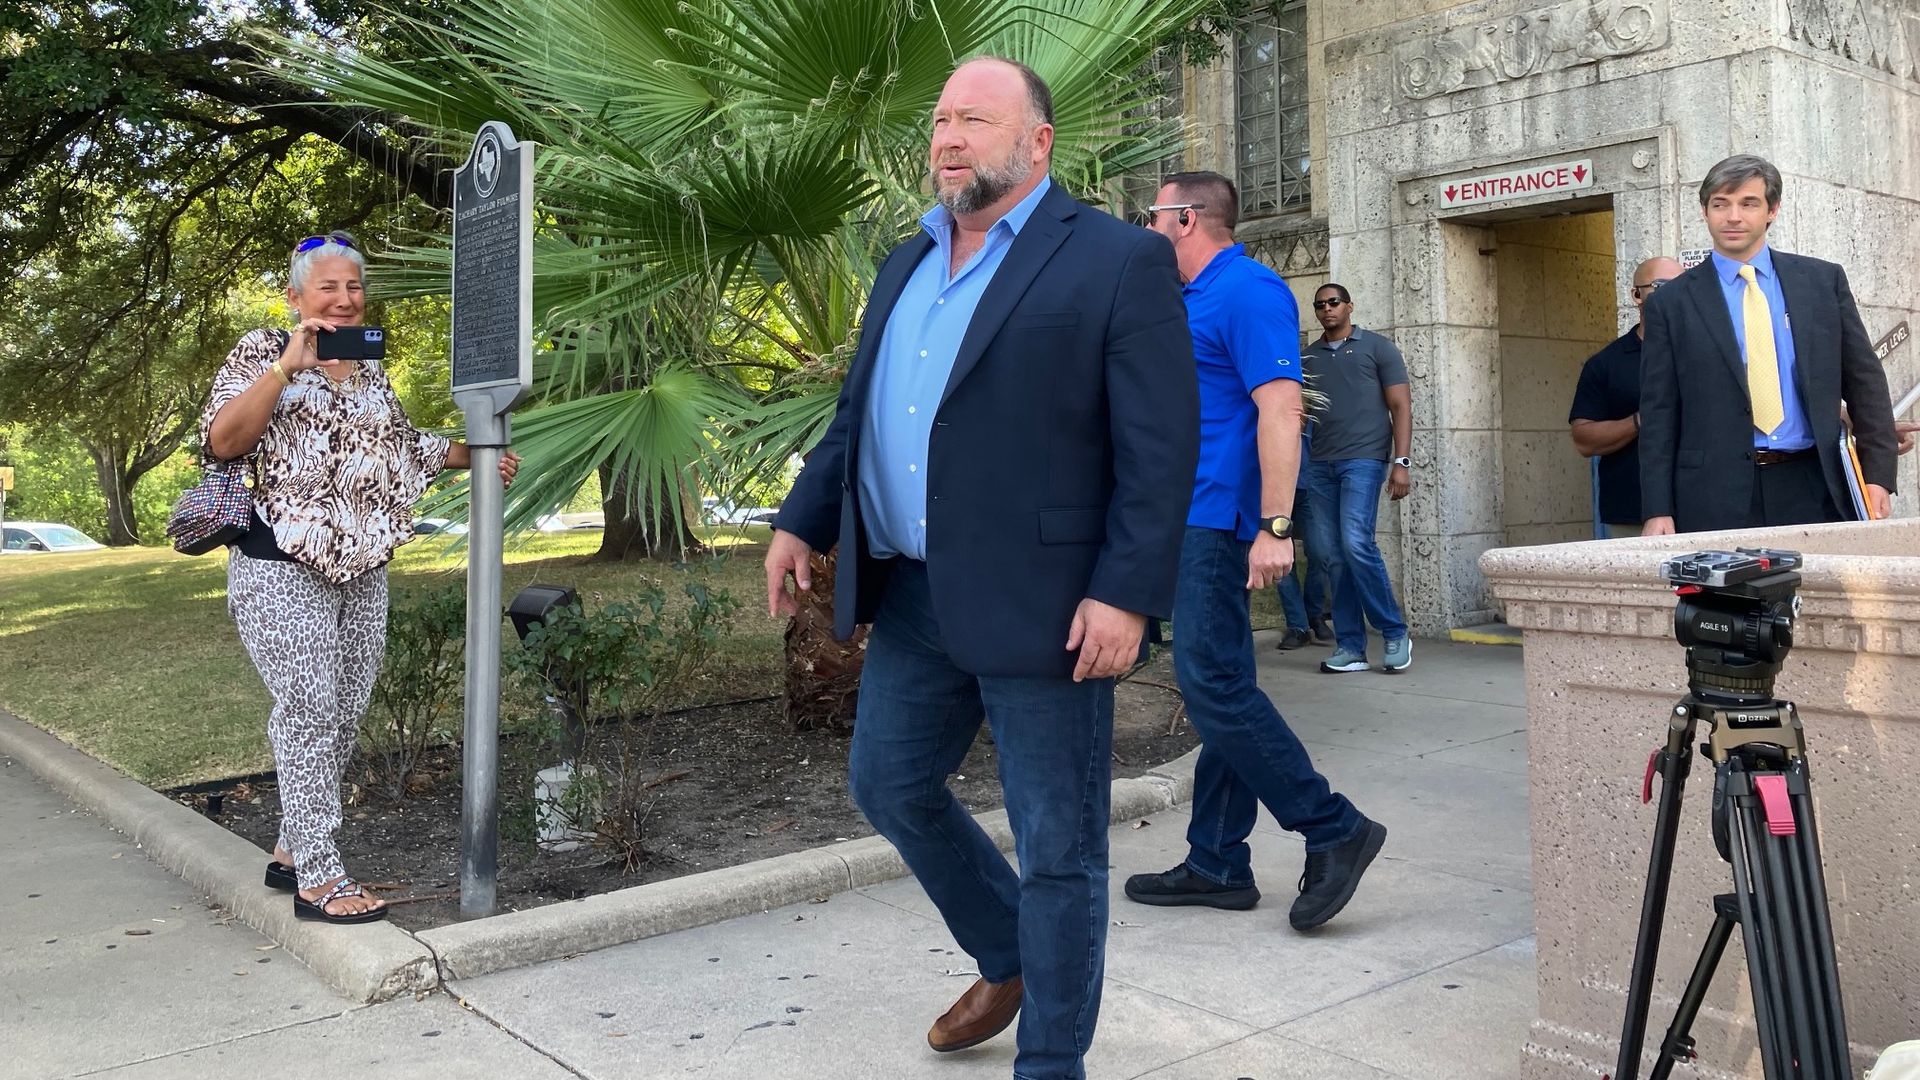 Alex Jones outside the Travis County Courthouse